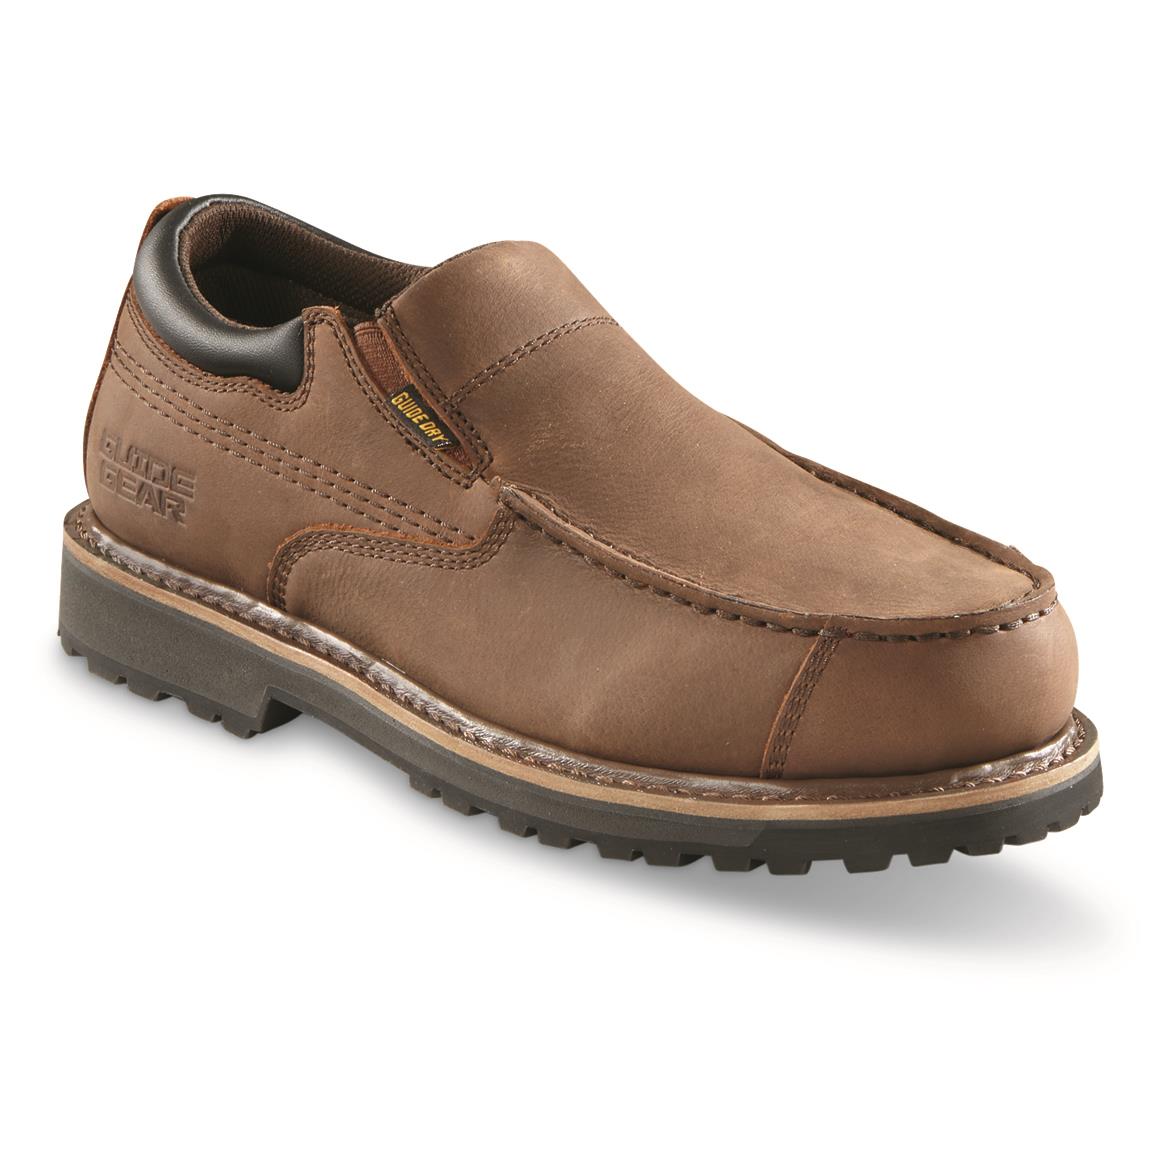 Guide Gear Rugged Timber Waterproof Slip-on Shoes, Canteen Brown